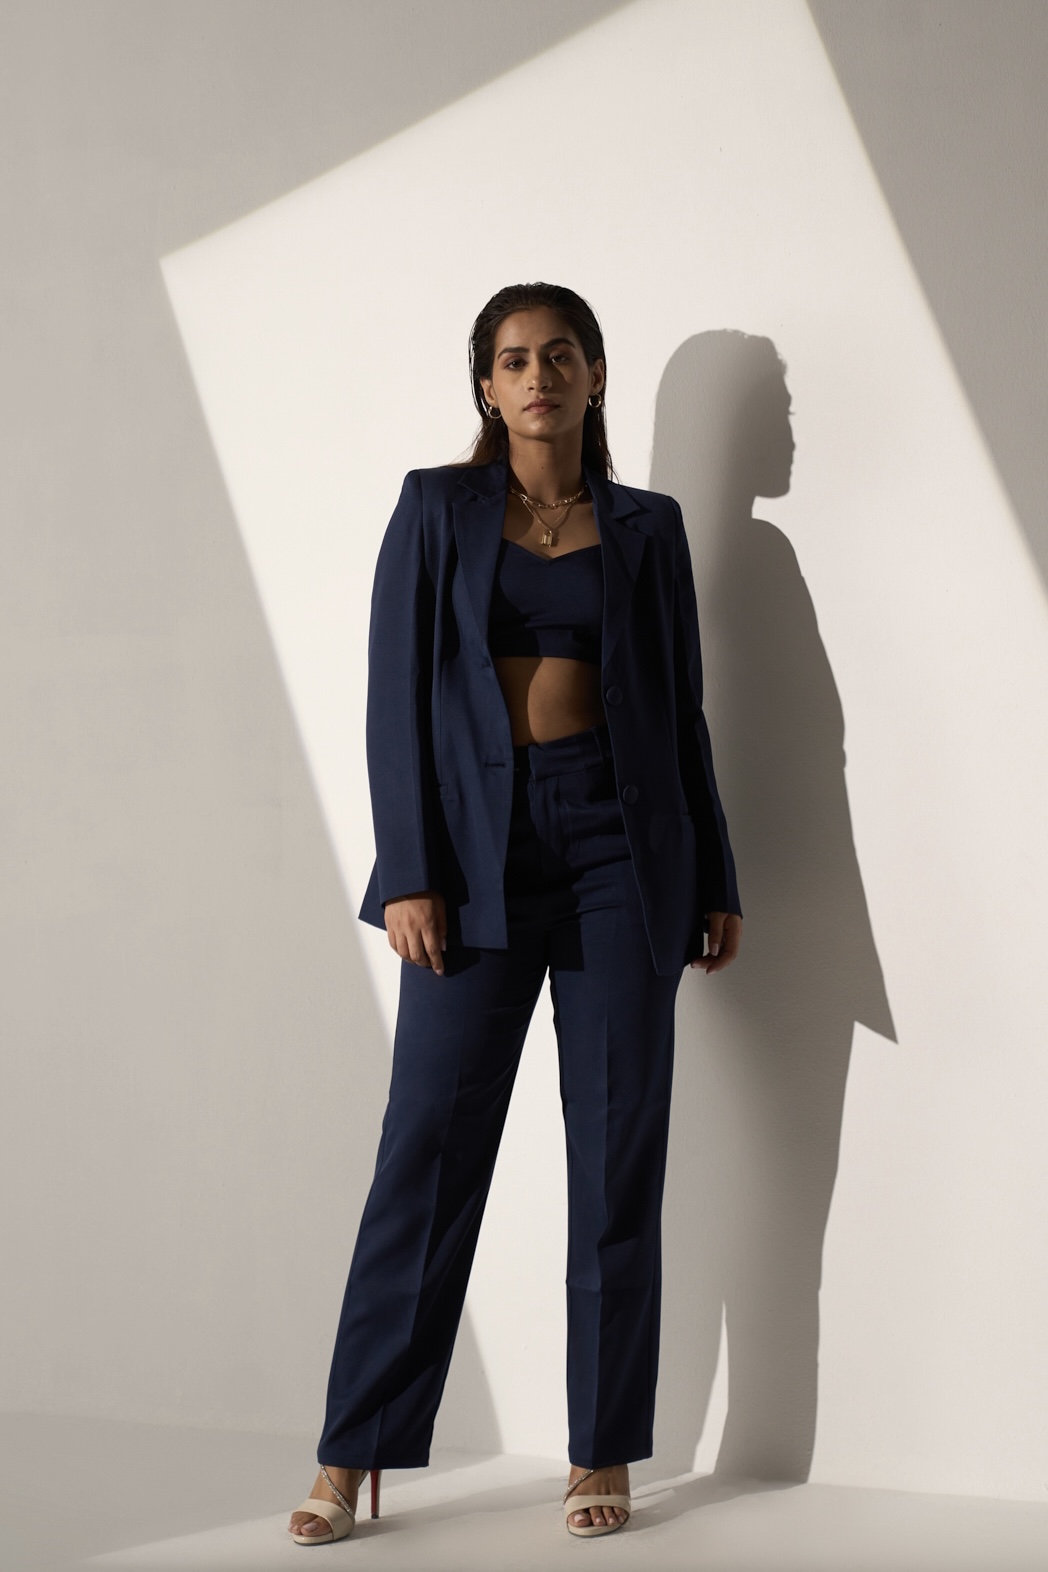 Buy Light Blue 3-piece Pantsuit for Women, Blue Blazer Trouser Suit for  Women With Bralette Top, Relaxed Fit Blazer and High Waist Pants Online in  India 